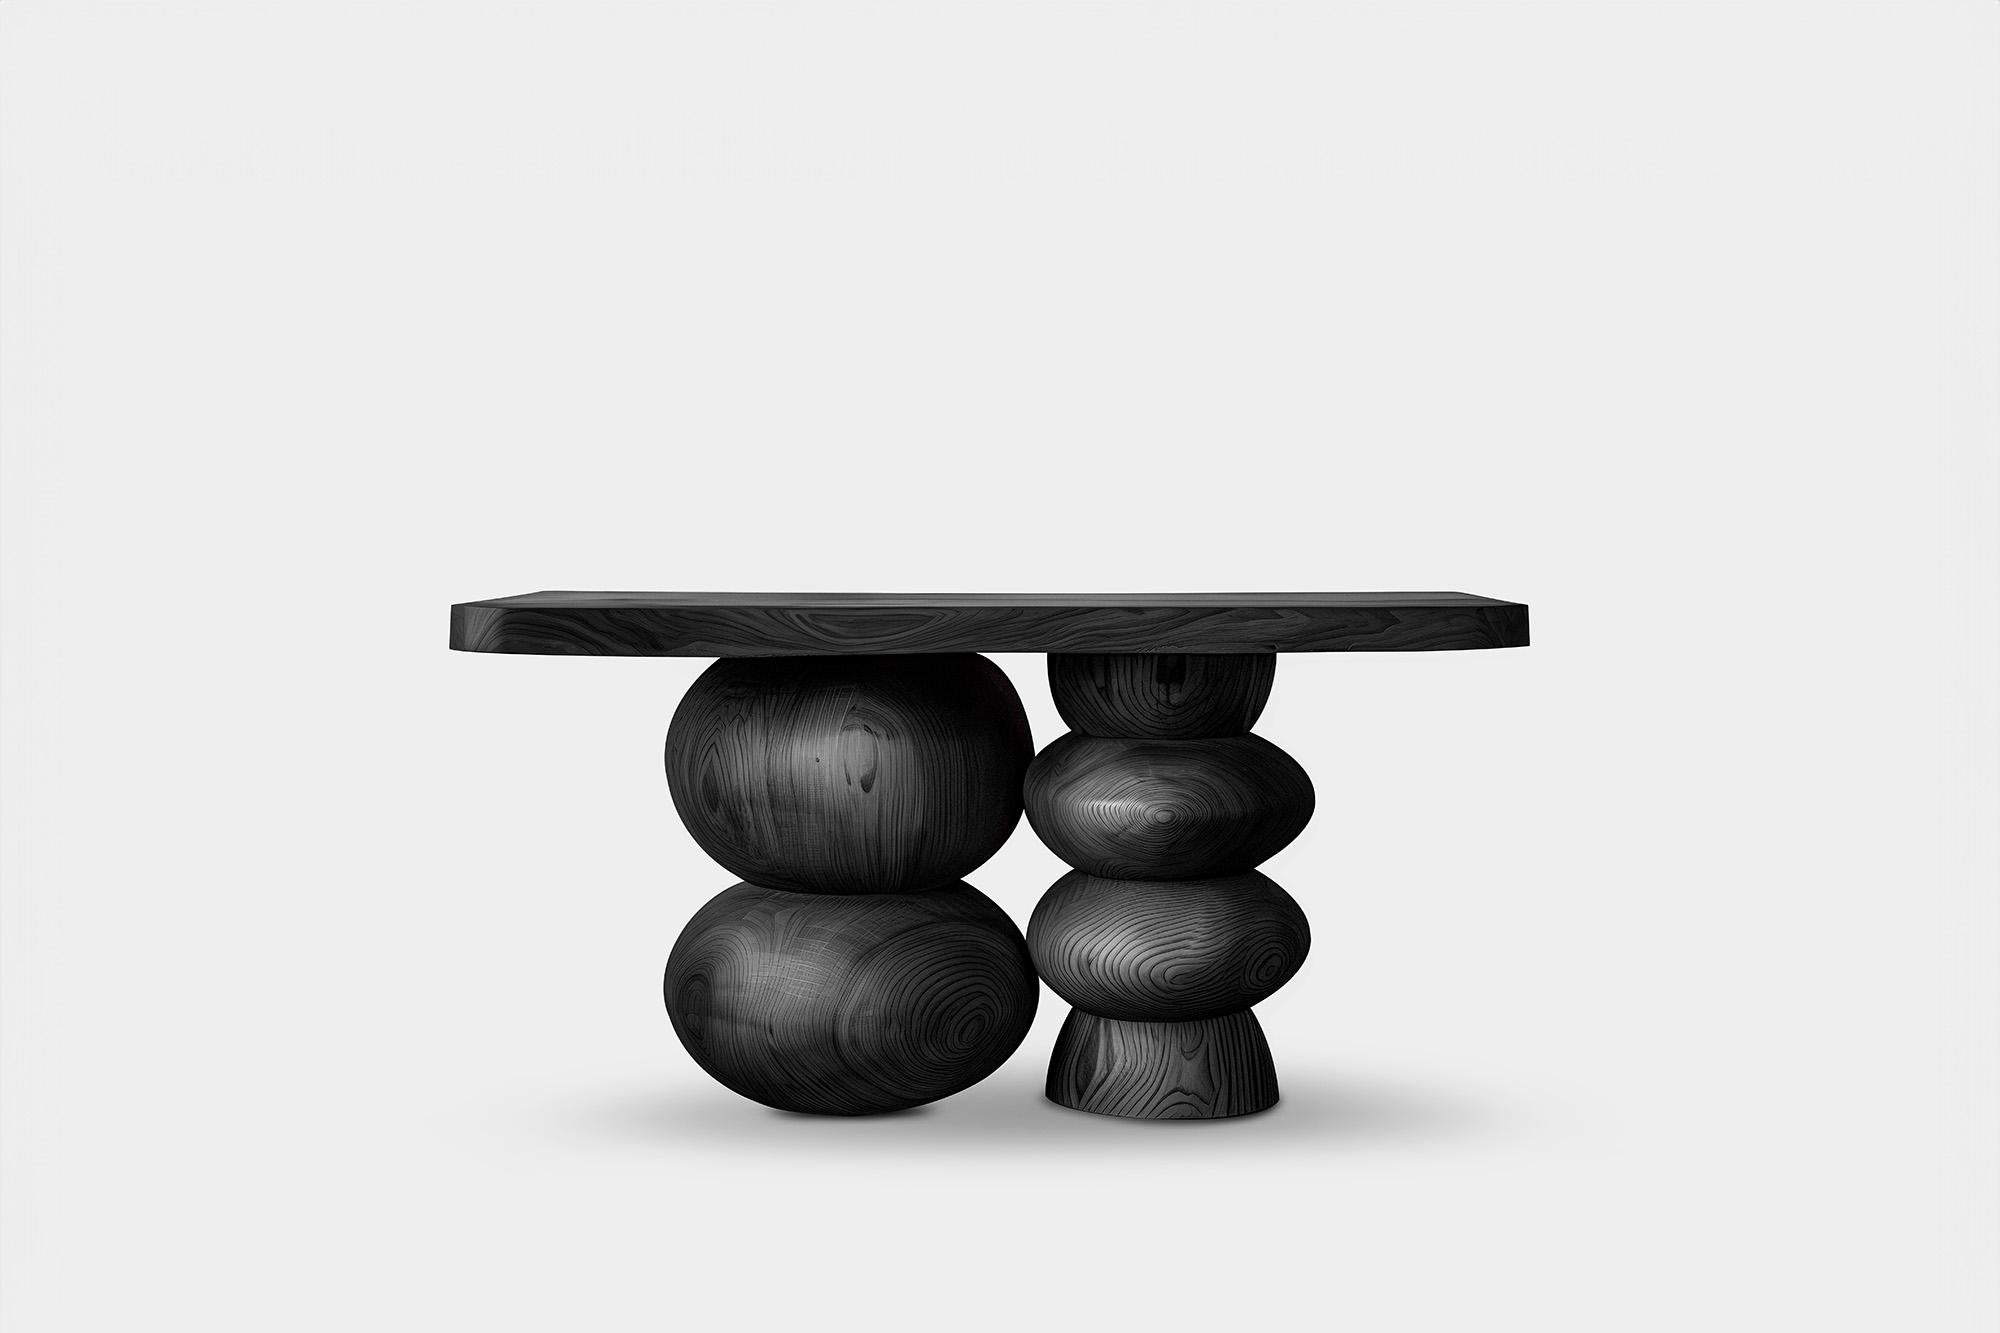 Elefante Console Table 39 by NONO, Stacked Design, Joel Escalona's Touch

—————————————————————
Elefante Collection: A Harmony of Design and Heritage by NONO

Crafting Elegance with a Modernist Touch

NONO, renowned for its decade-long journey in